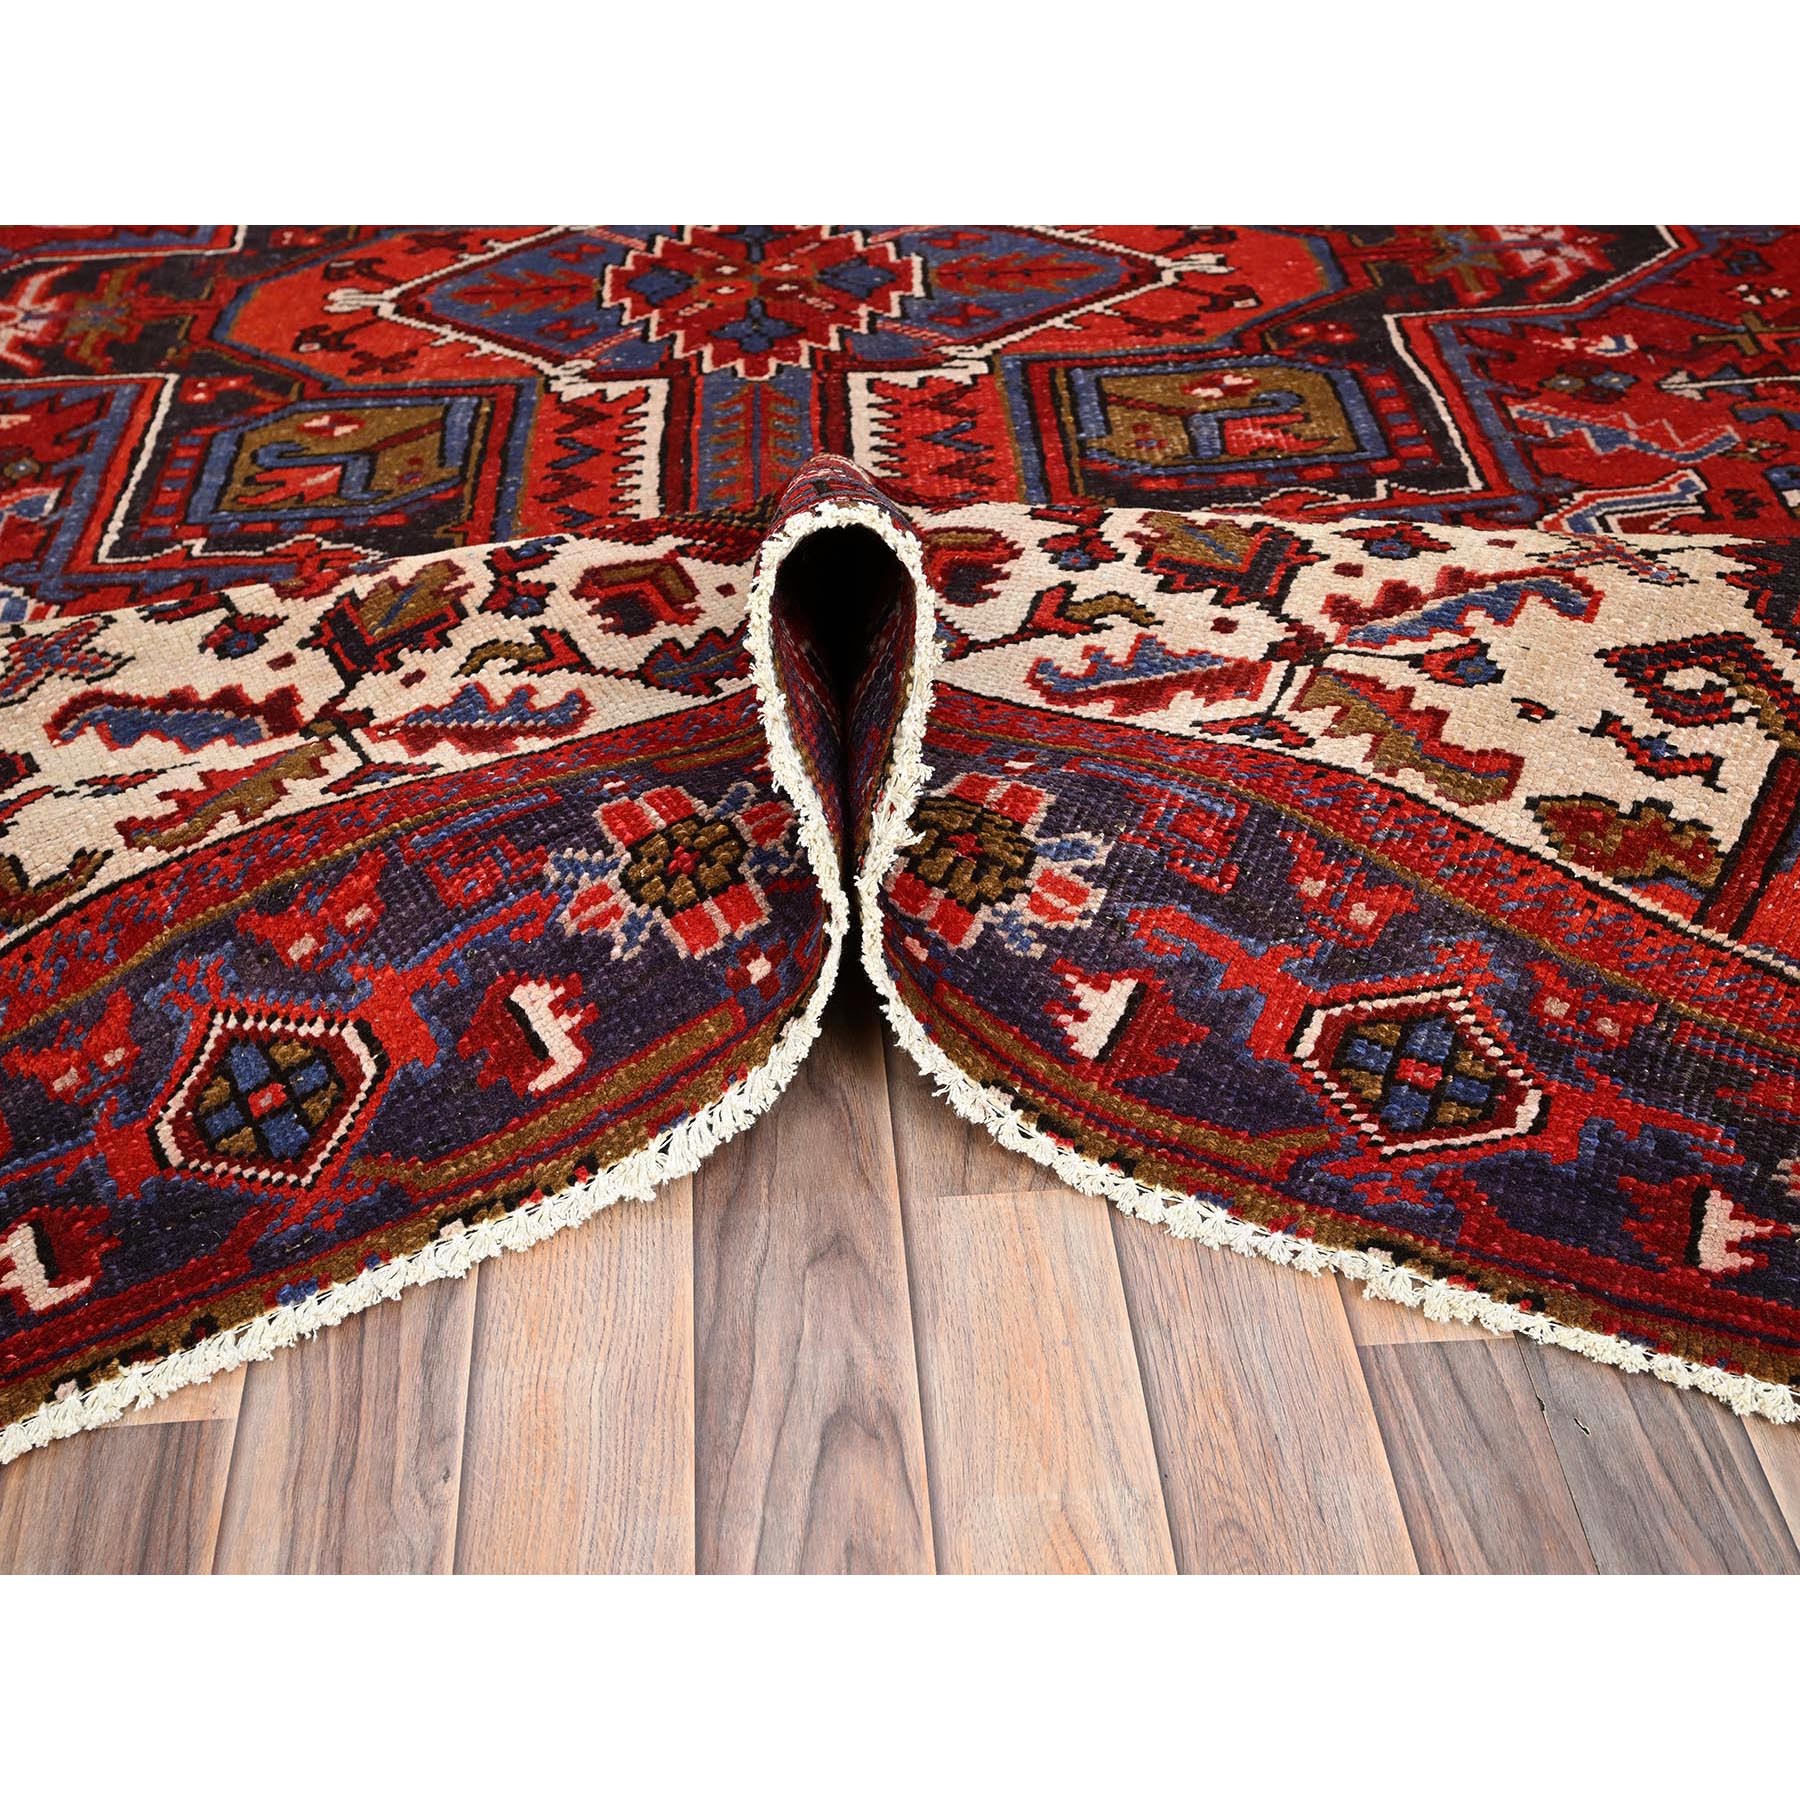  Wool Hand-Knotted Area Rug 8'6